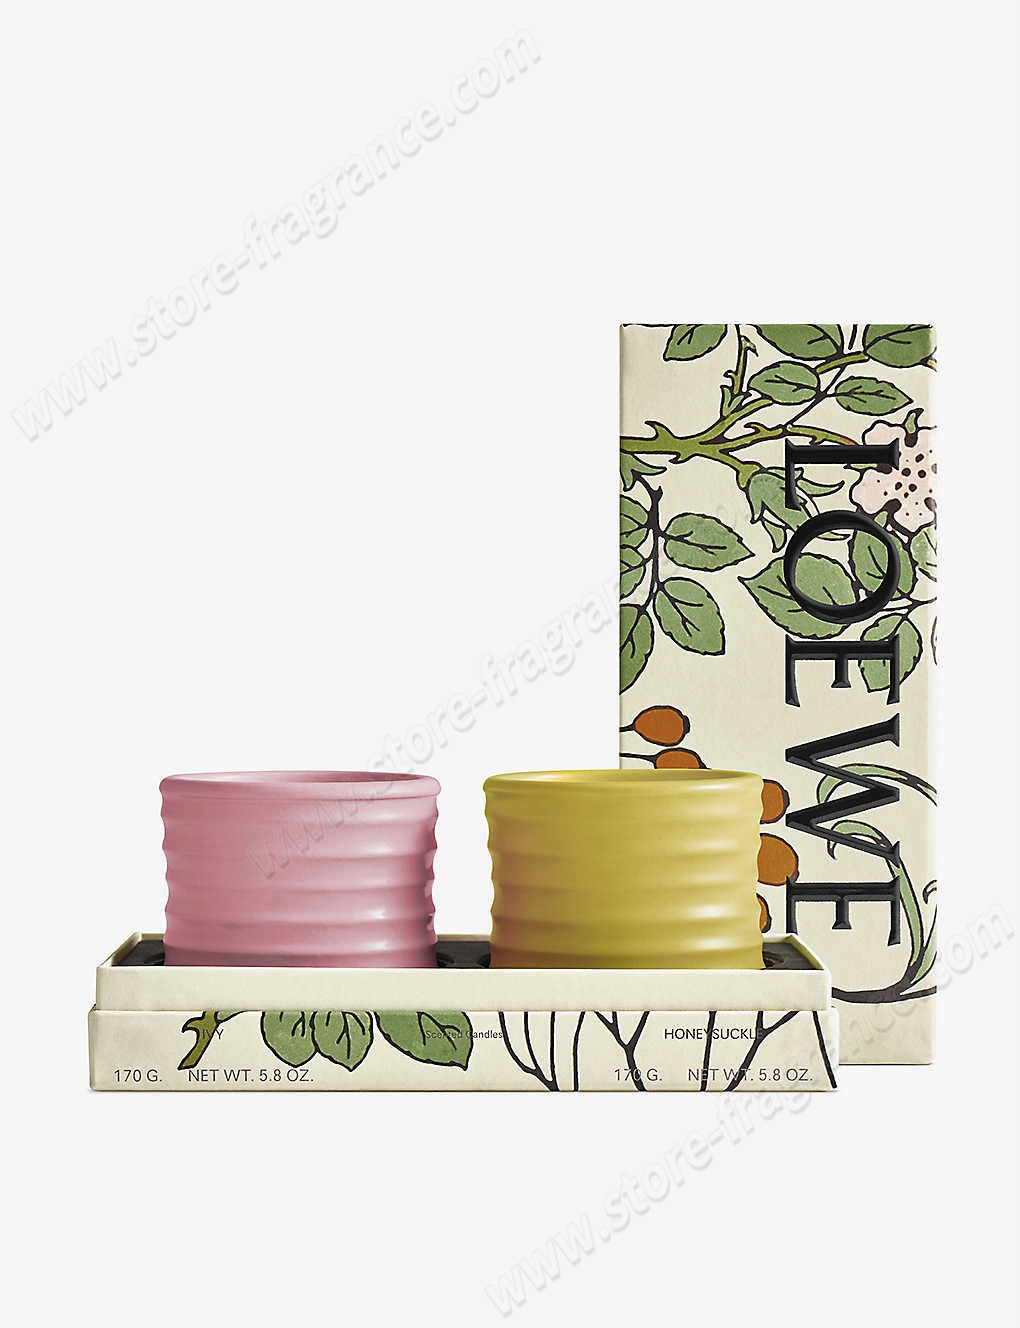 LOEWE/Honeysuckle and Ivy scented candle gift set Limit Offer - LOEWE/Honeysuckle and Ivy scented candle gift set Limit Offer